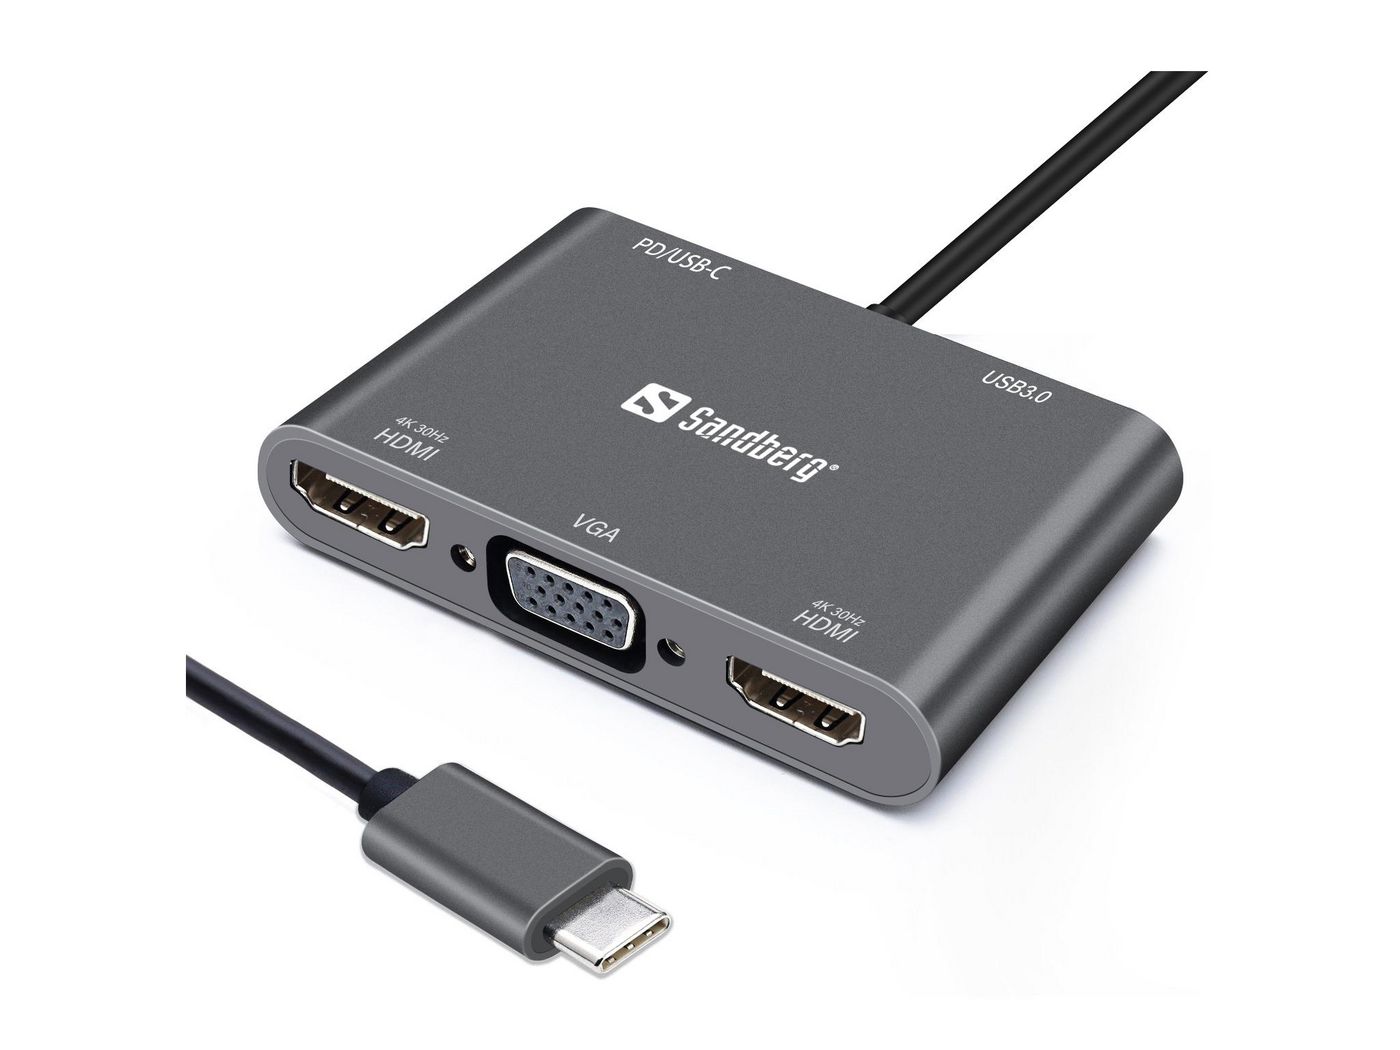 USB-C Dock - 2x HDMI / USB-C PD / USB 3.0 A / VGA - 100w USB Power Delivery